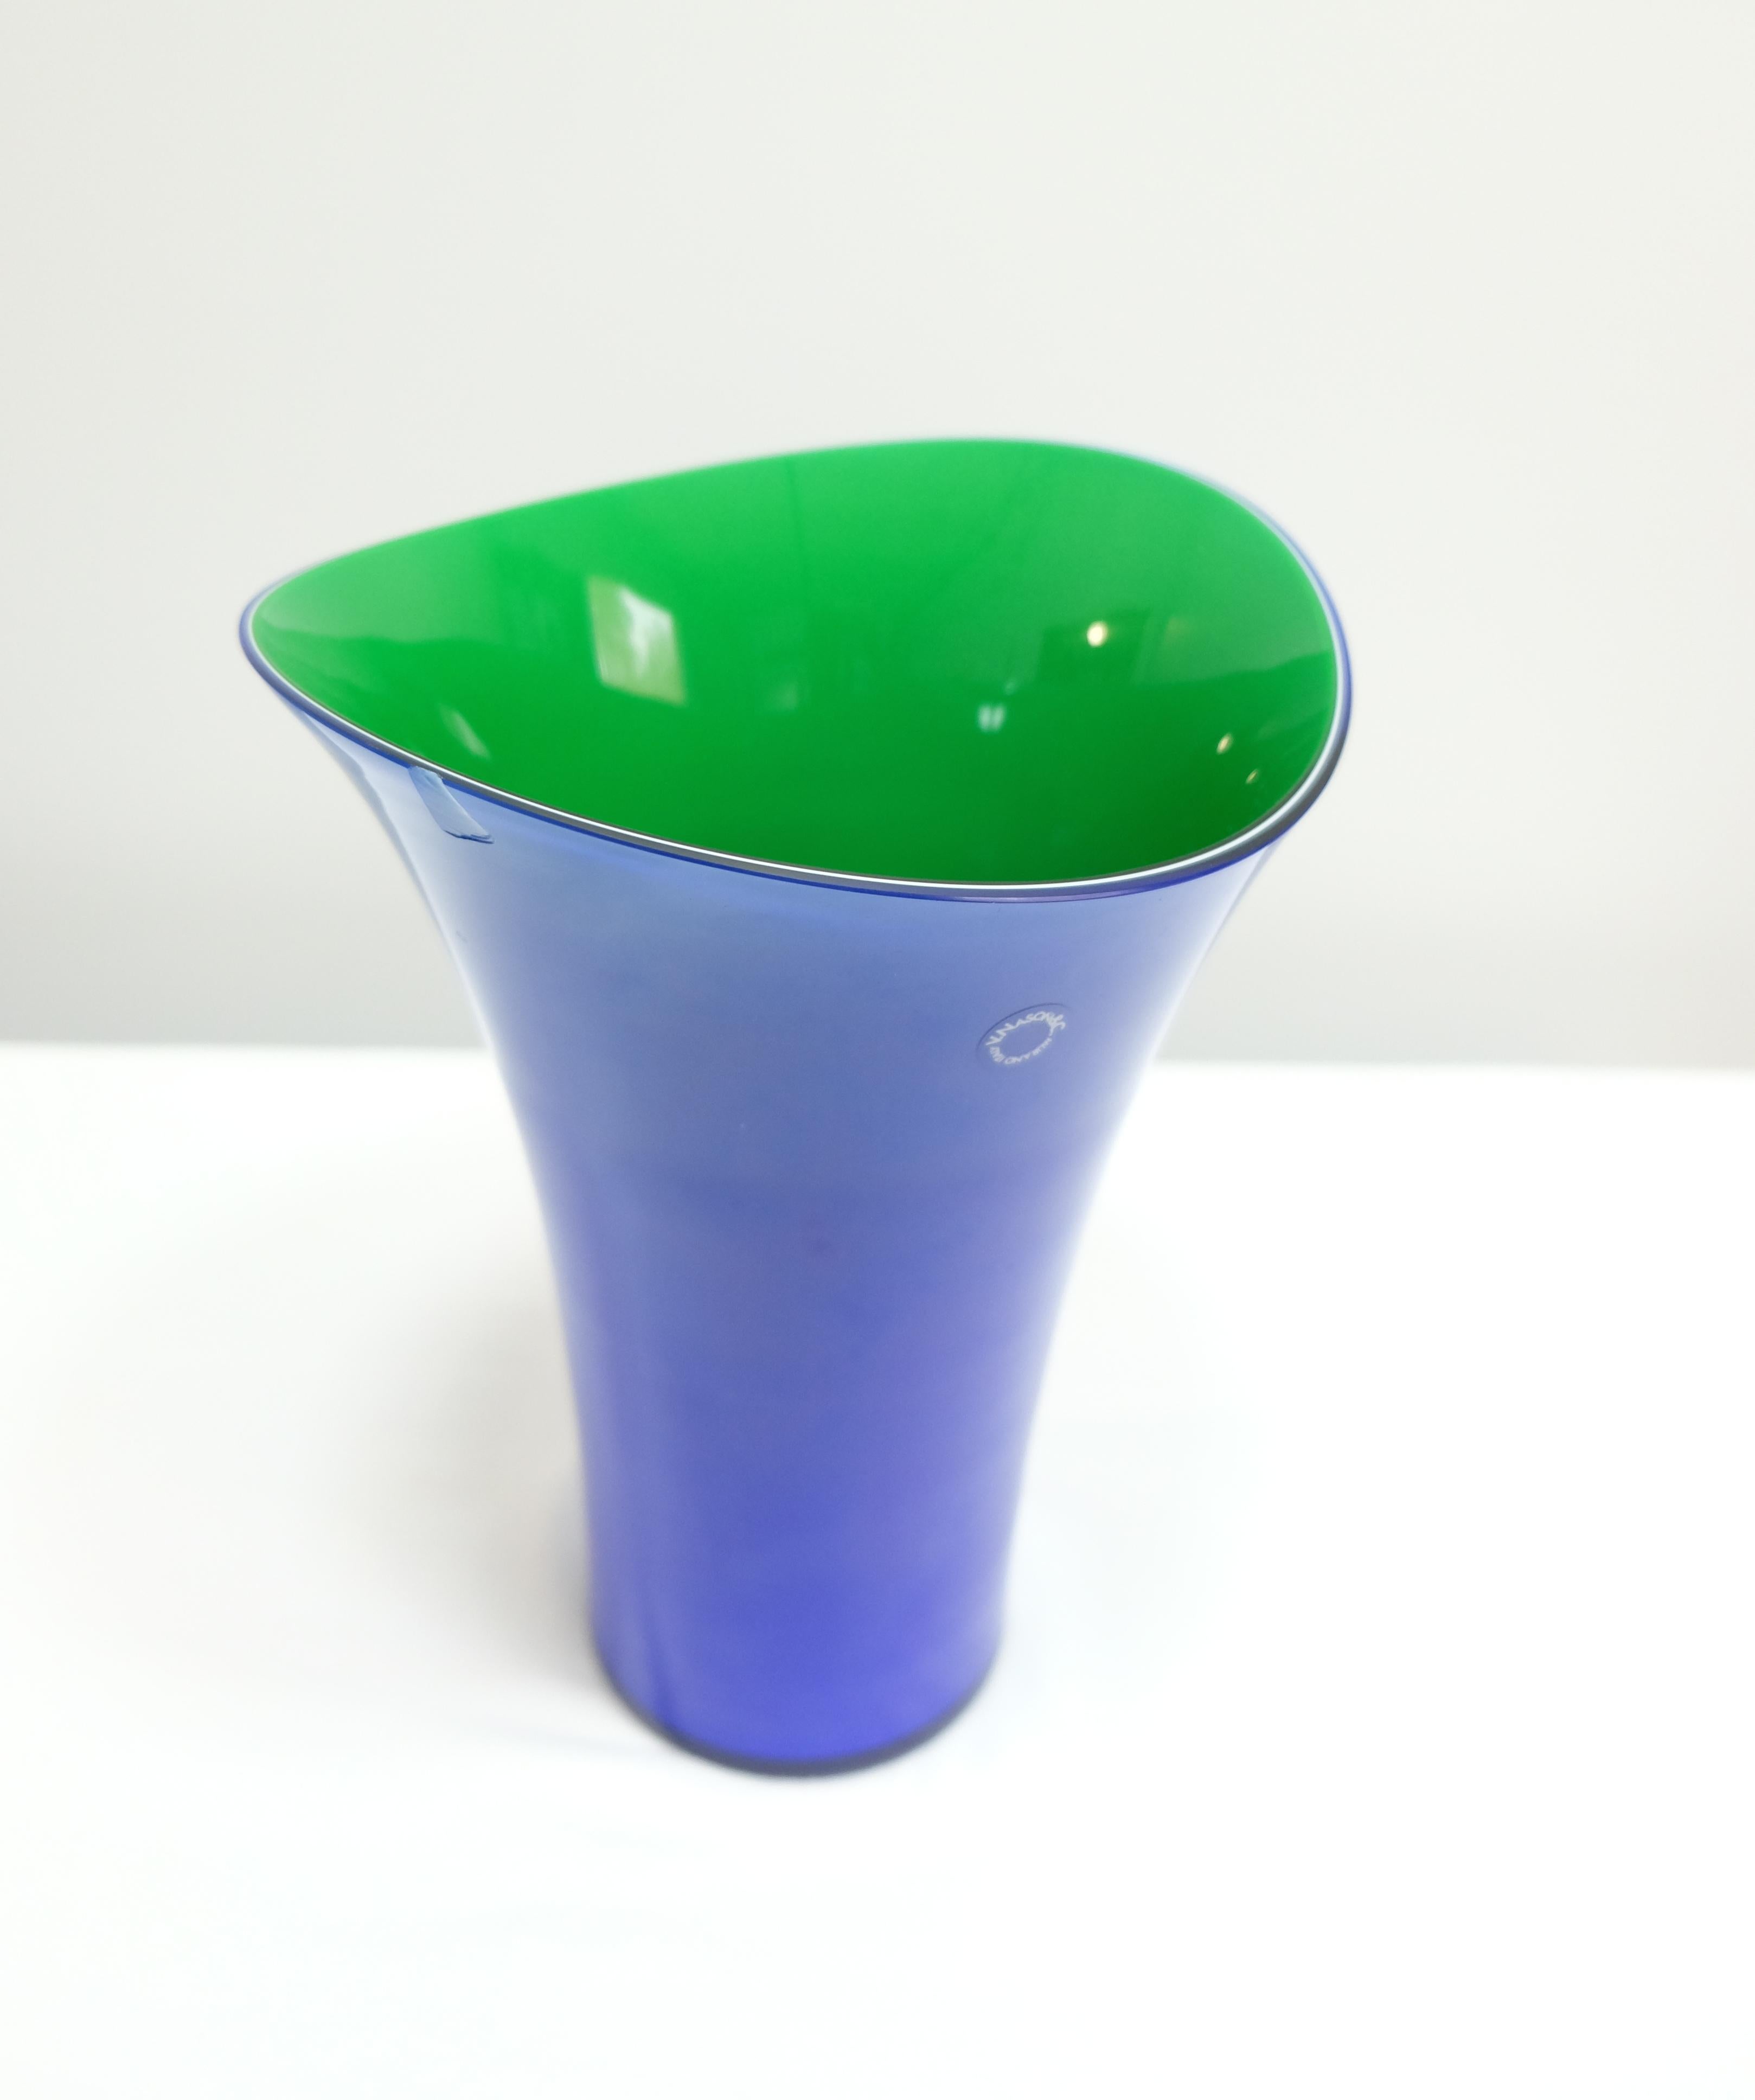 Murano Glass Vase Set by V. Nason & C. Italy, Blue and Green Asymmetric Vases For Sale 4